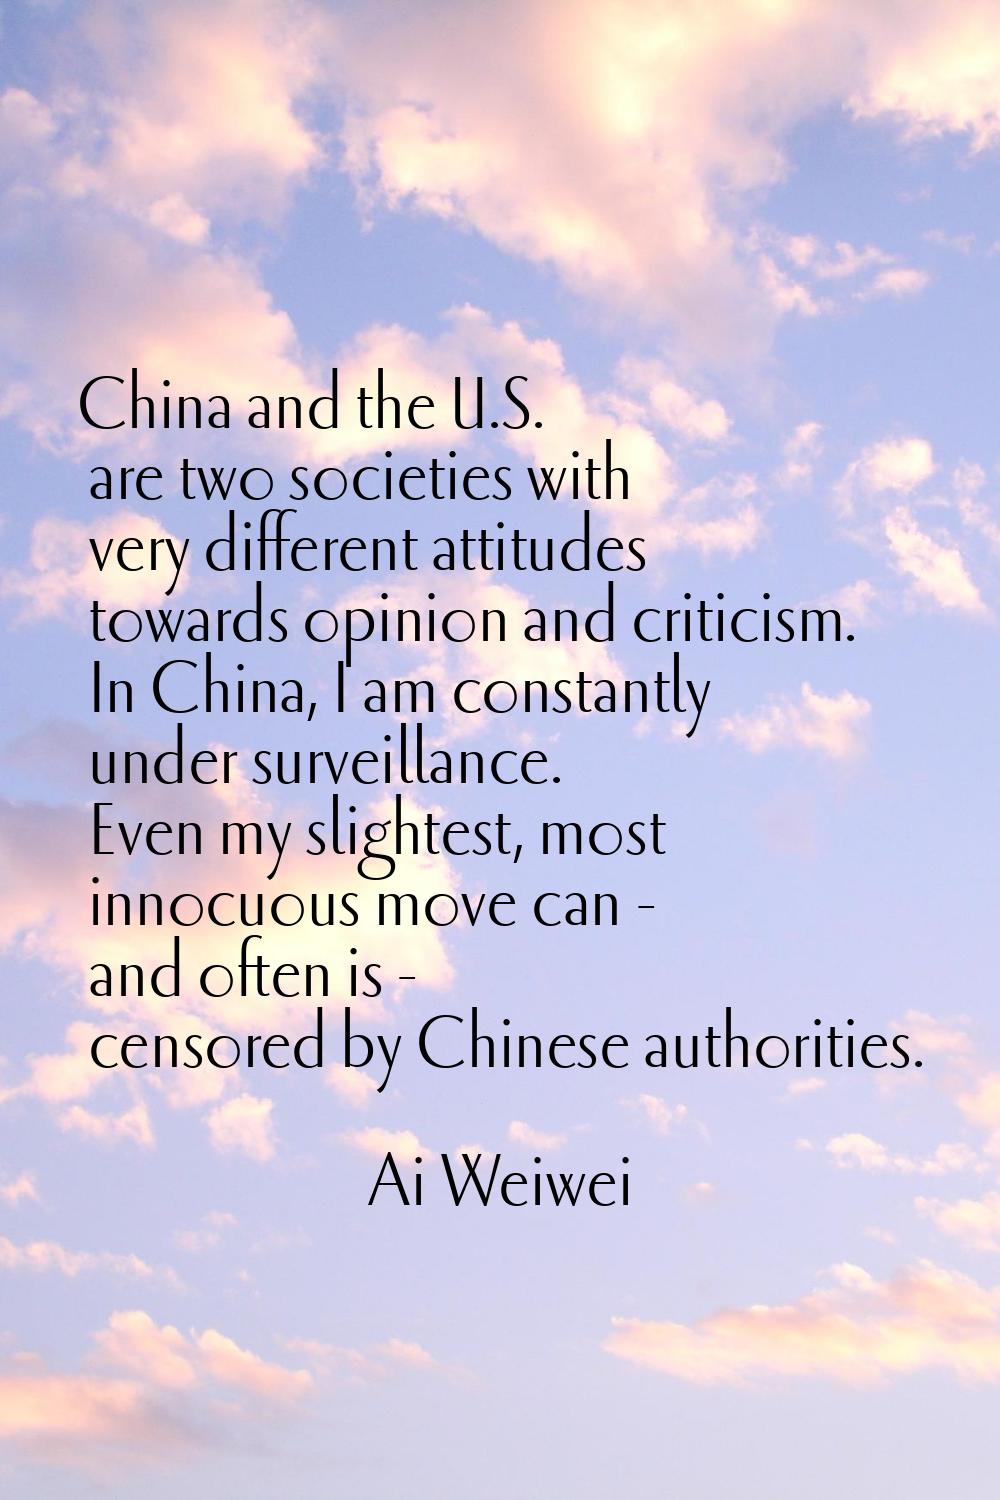 China and the U.S. are two societies with very different attitudes towards opinion and criticism. I